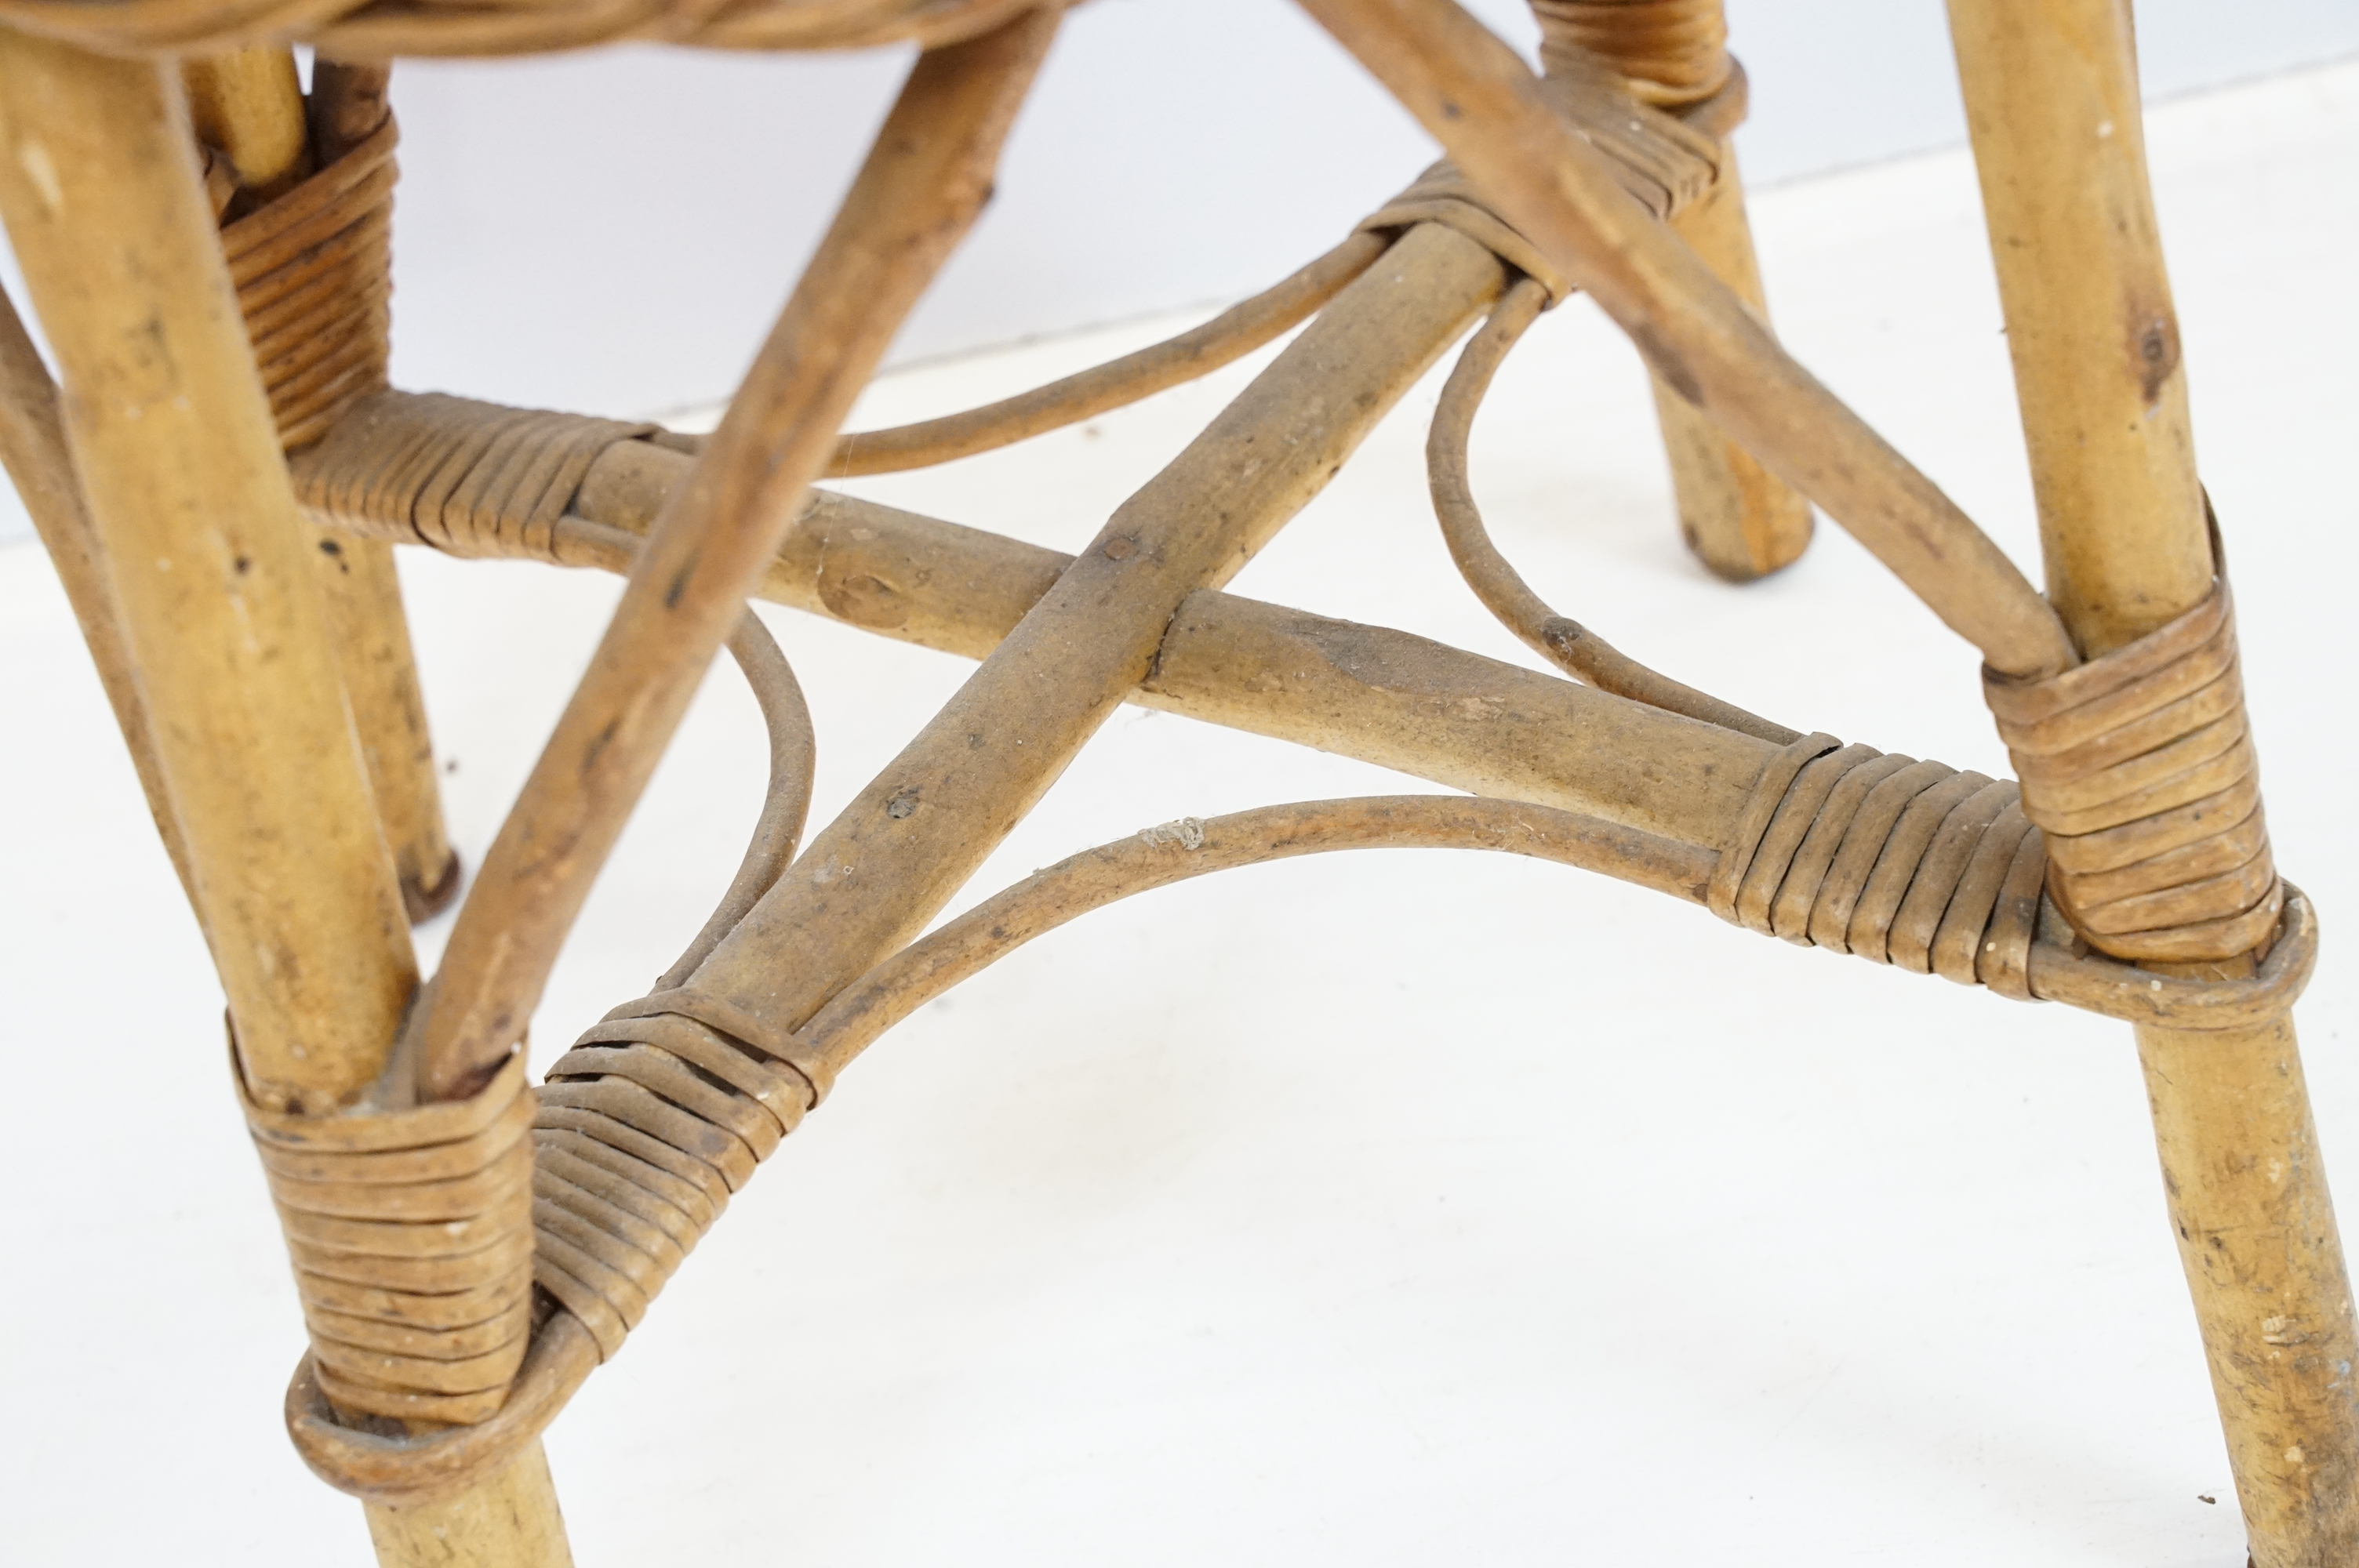 Pair of Wicker & Bamboo Stool or Stands, 36cm diameter x 36cm high - Image 6 of 7